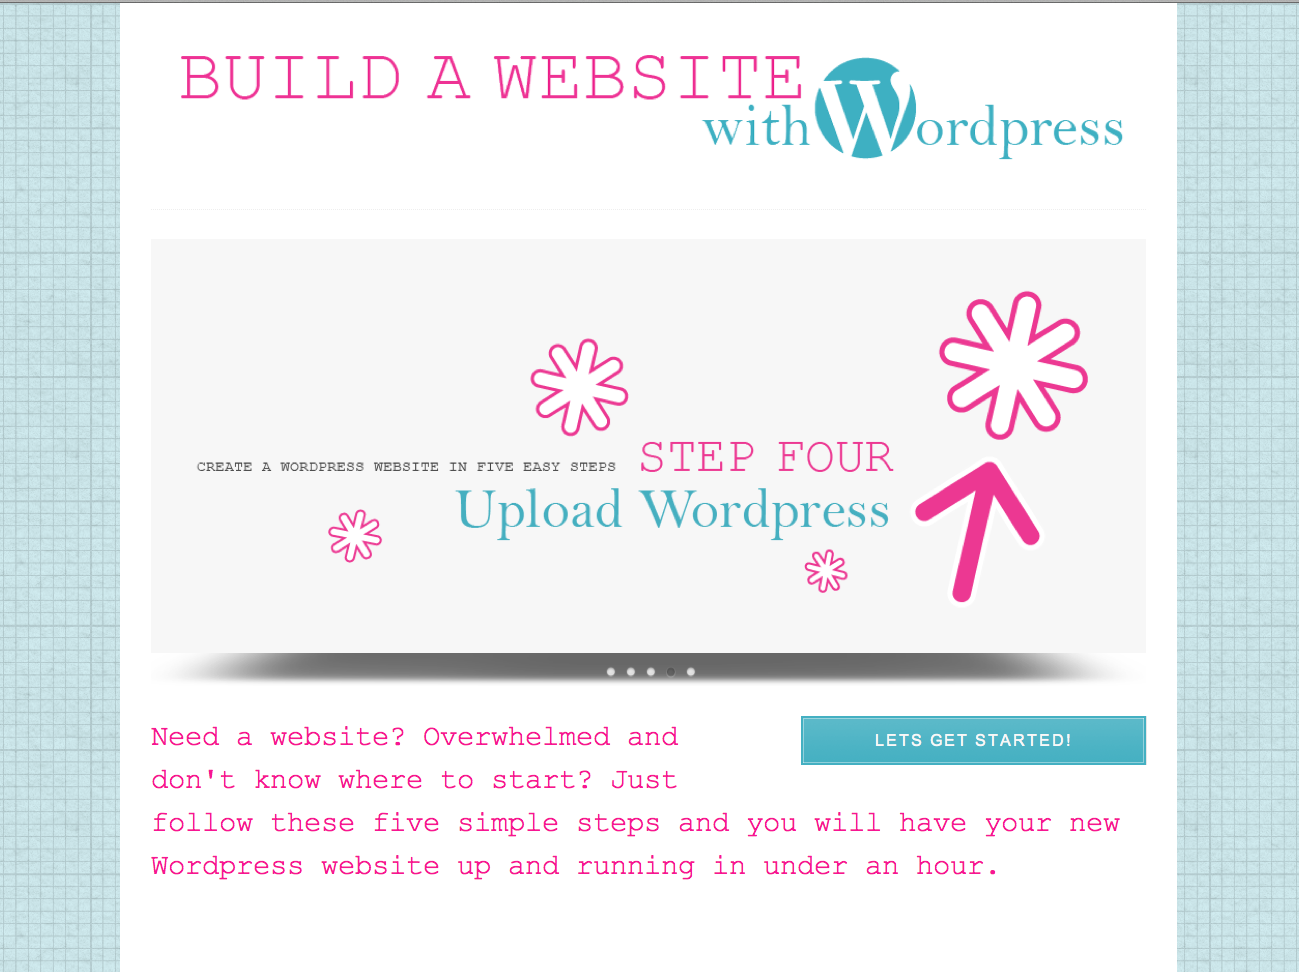 Build a Website with WordPress